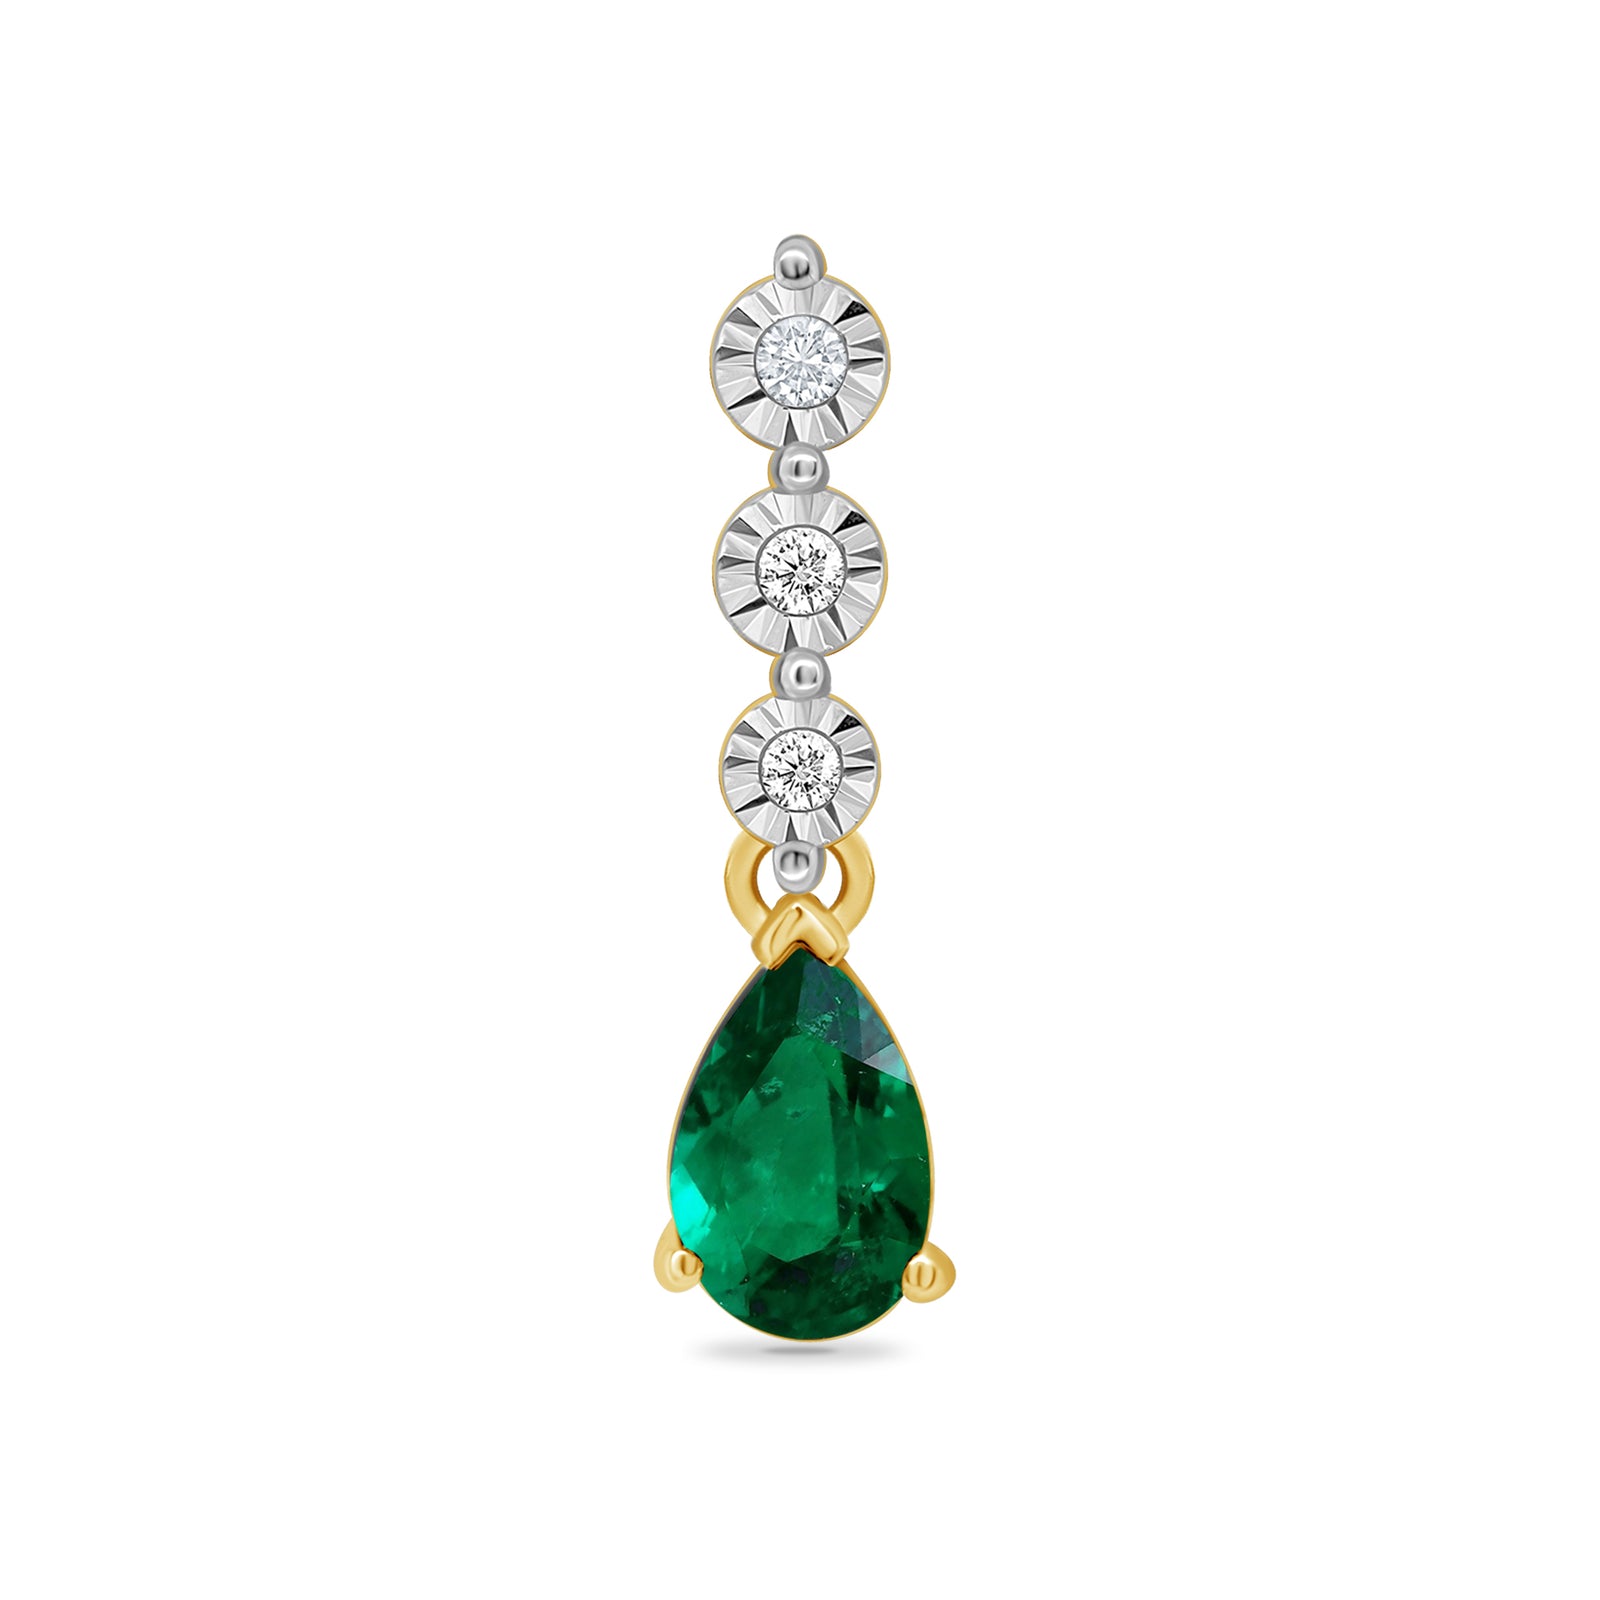 9ct gold 6x4mm pear shape emerald & miracle plate diamond pendant 0.02ct